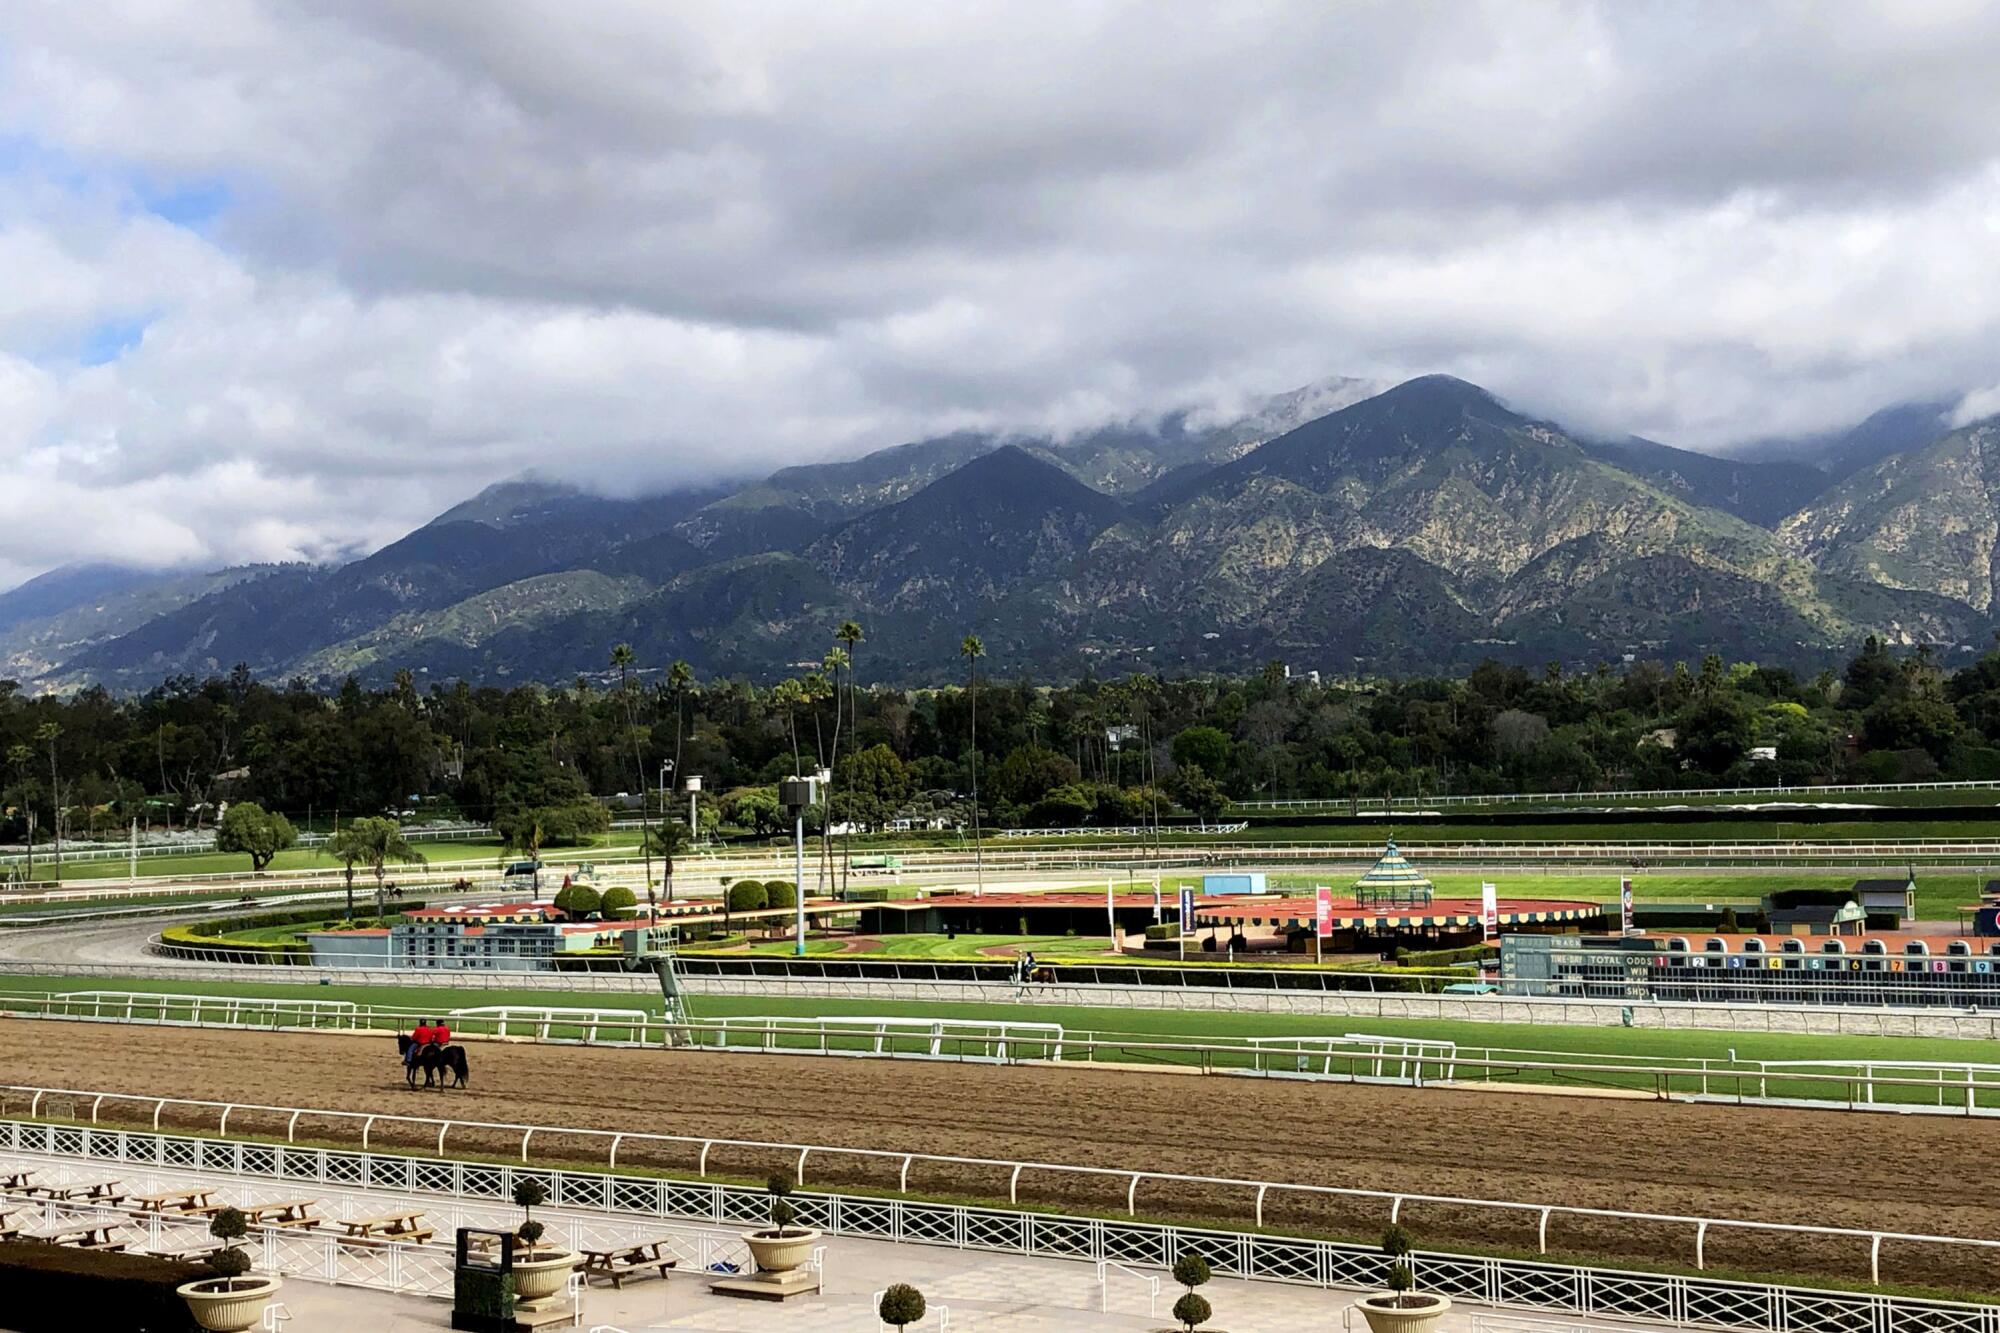 Horses and riders are on the track at Santa Anita Park in Arcadia.